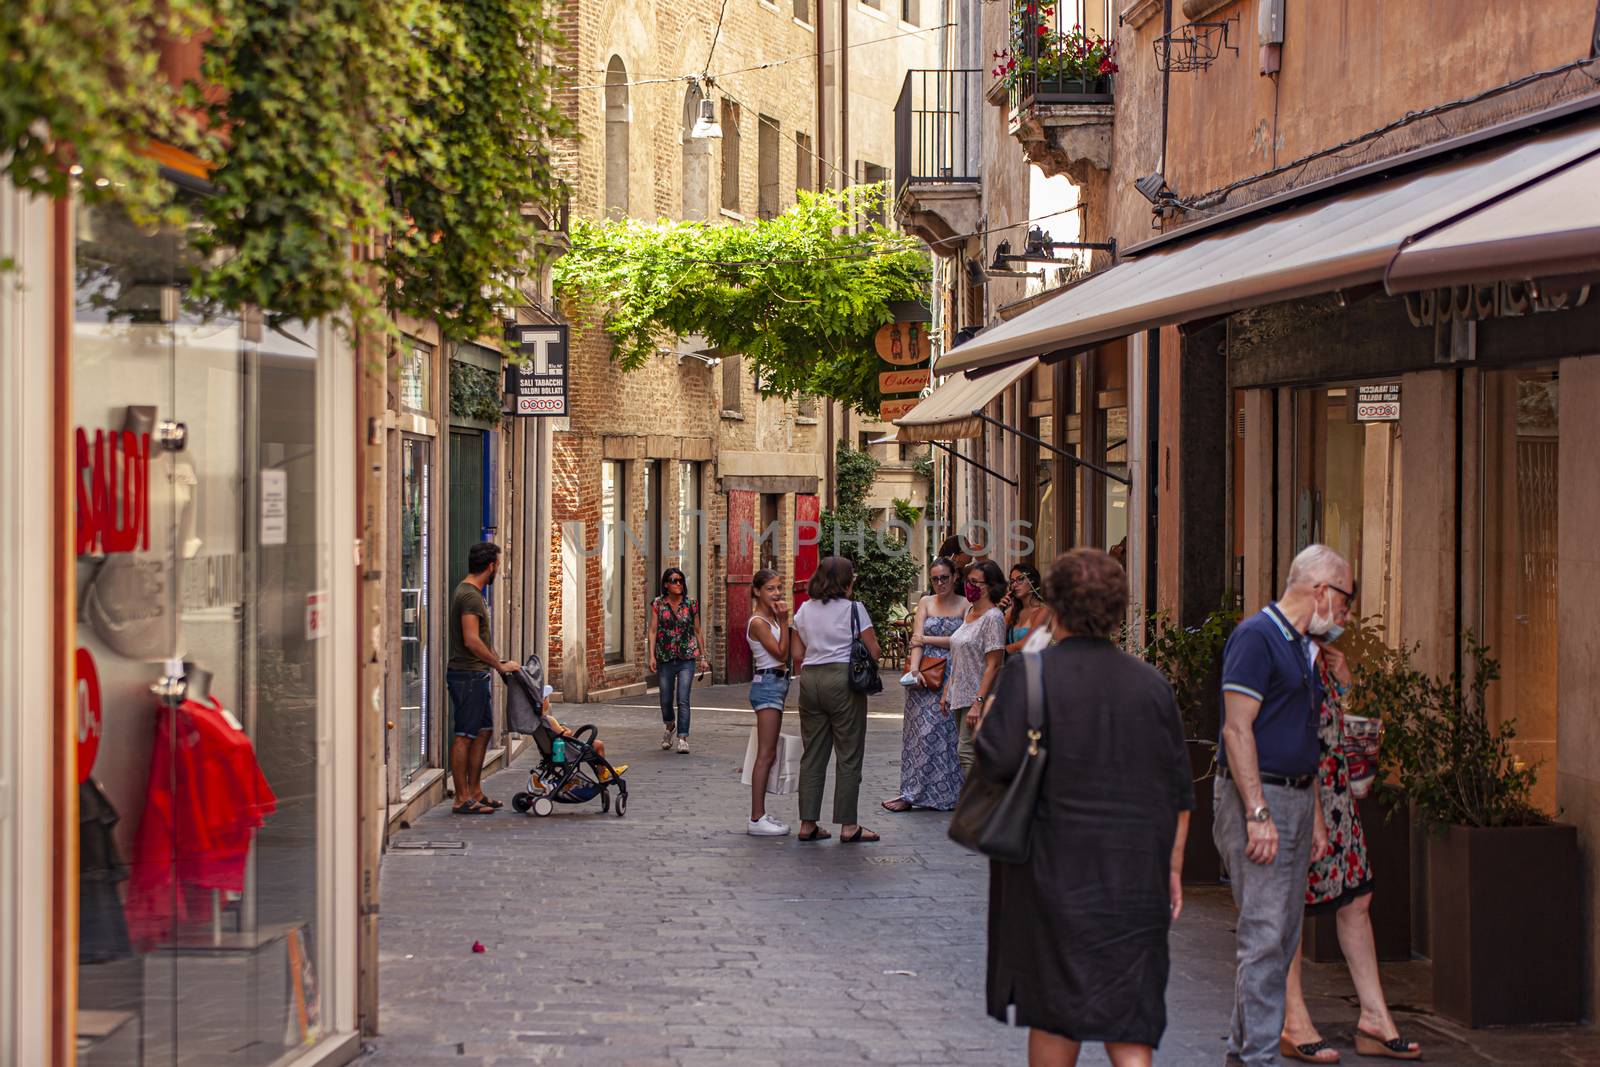 People walking in Treviso alley in Italy by pippocarlot